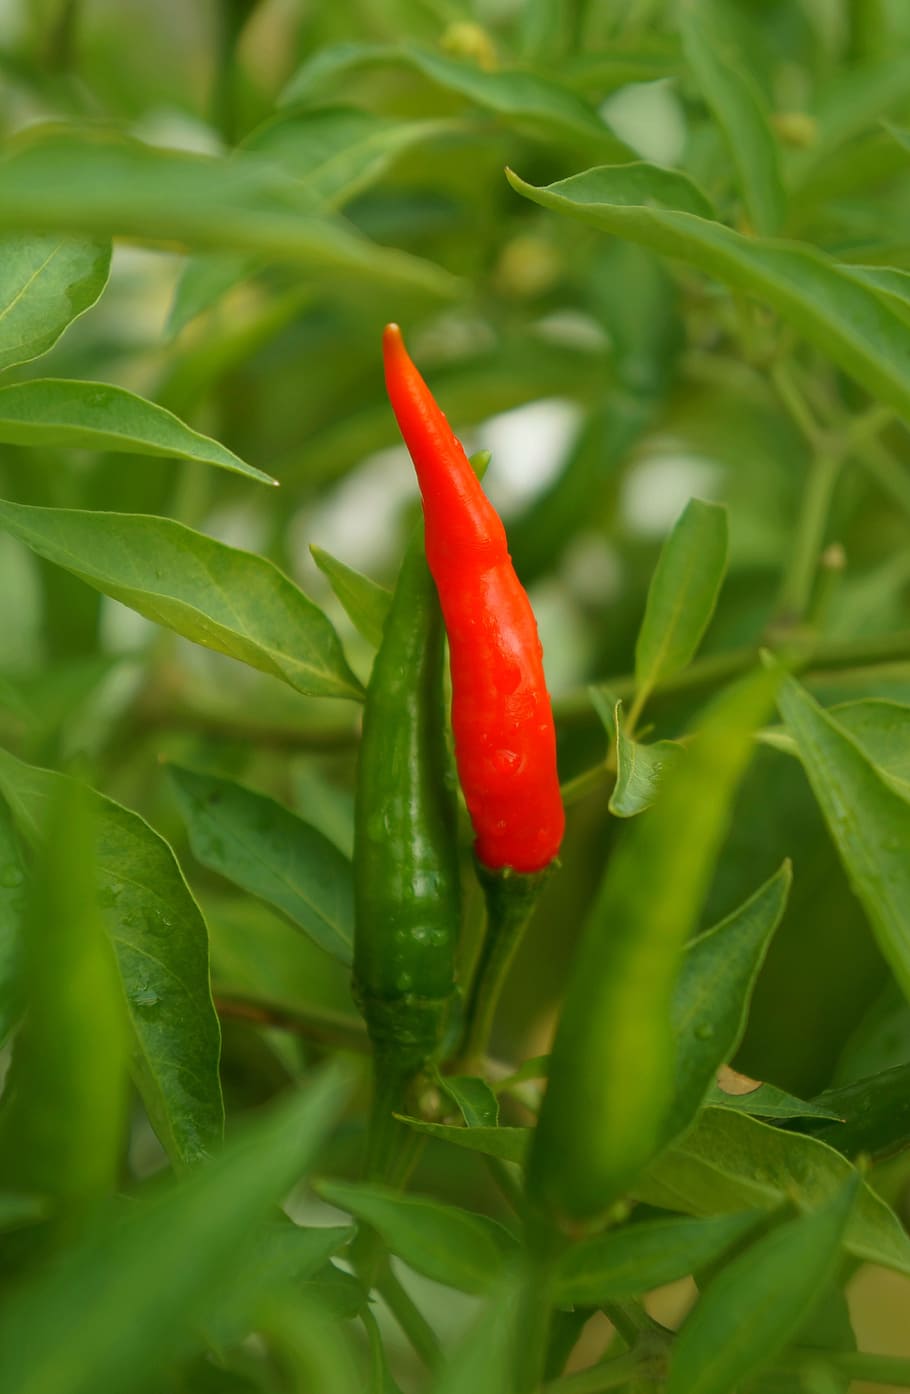 food, chilli, red, green color, pepper, chili pepper, vegetable, spice, growth, plant